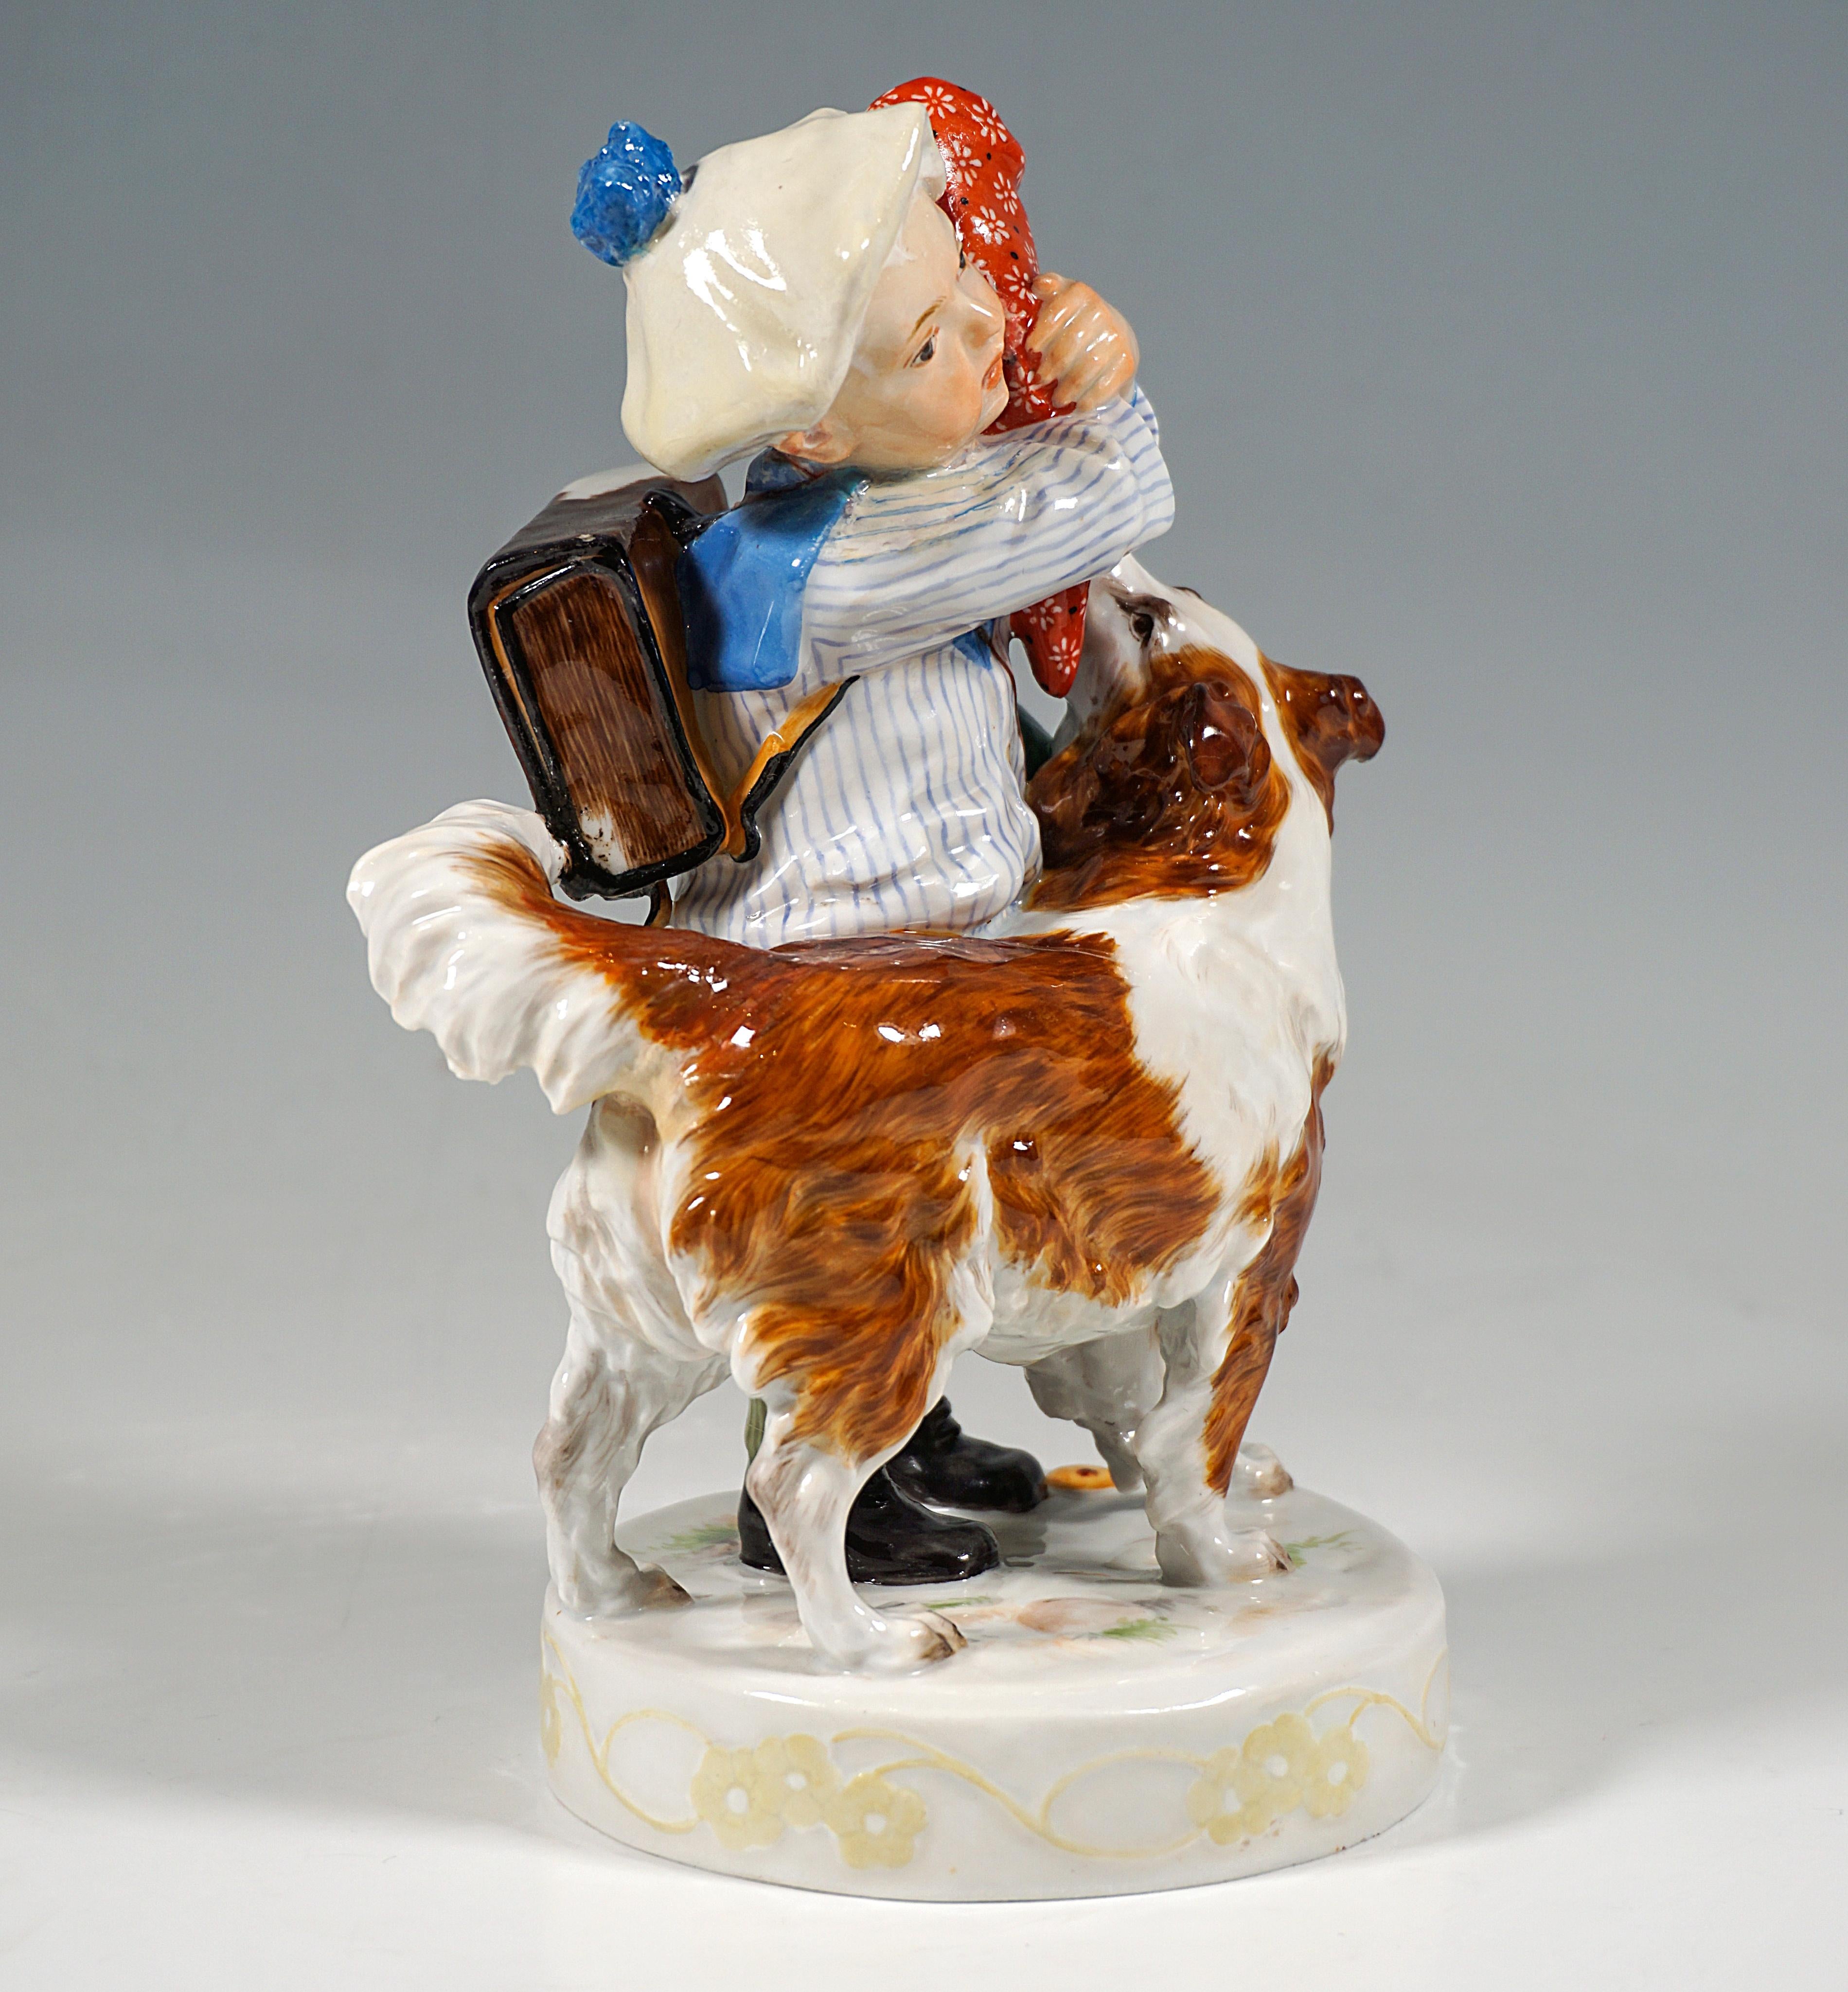 Very rare Meissen Art Nouveau porcelain group:
A boy in a striped school suit with a white cap and a school bag clutches his candy cone with both arms and tries to fend off the big dog, a collie, who is trying to get at the sweets falling out of the